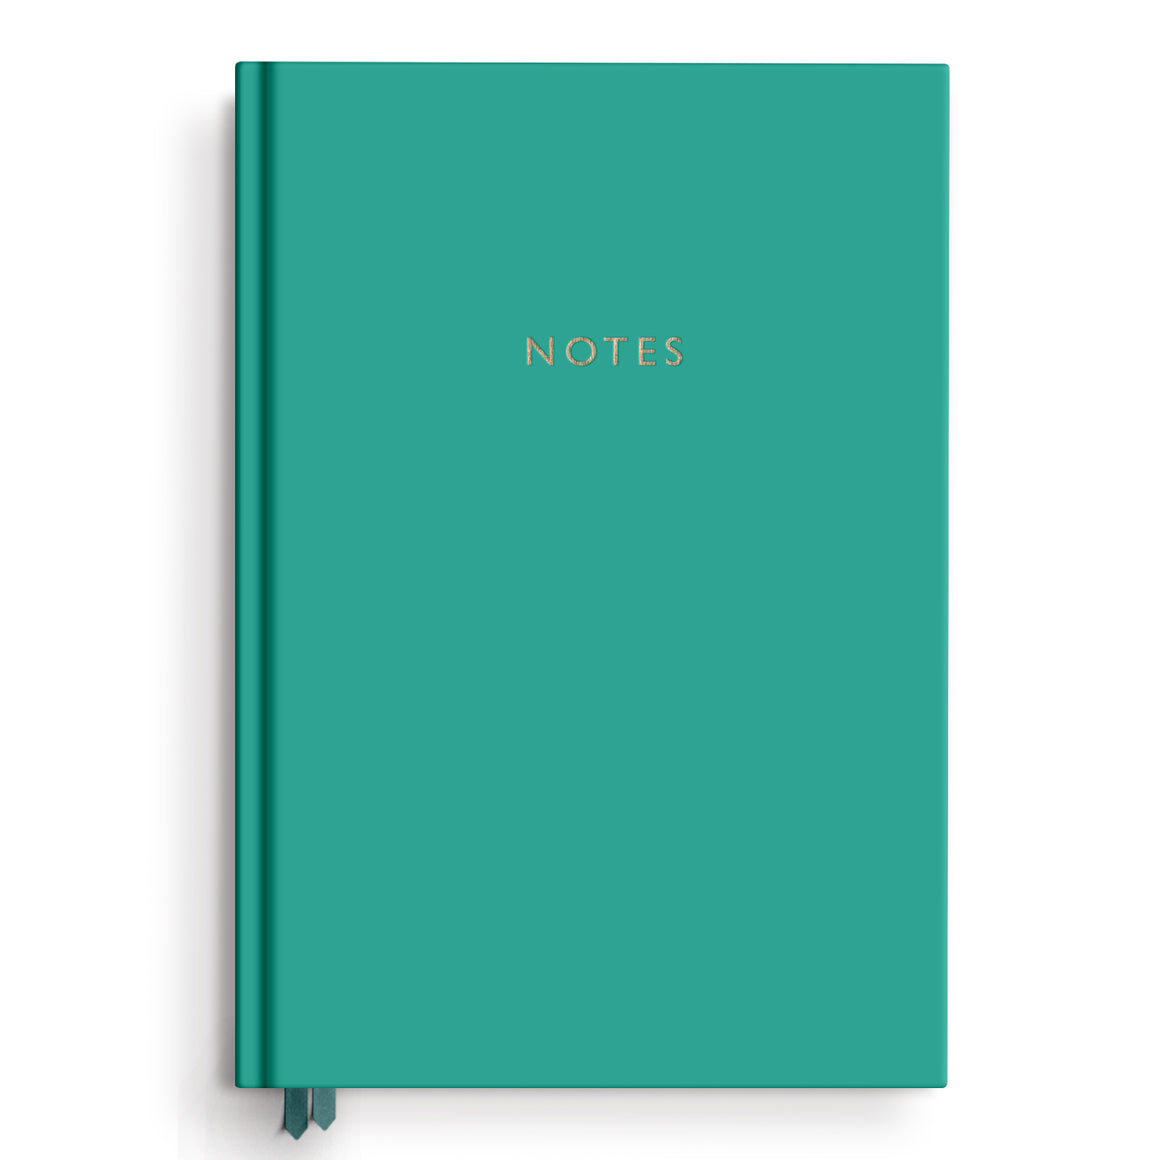 NB86COL-Teal A5 Case Bound Notebook PRE ORDER